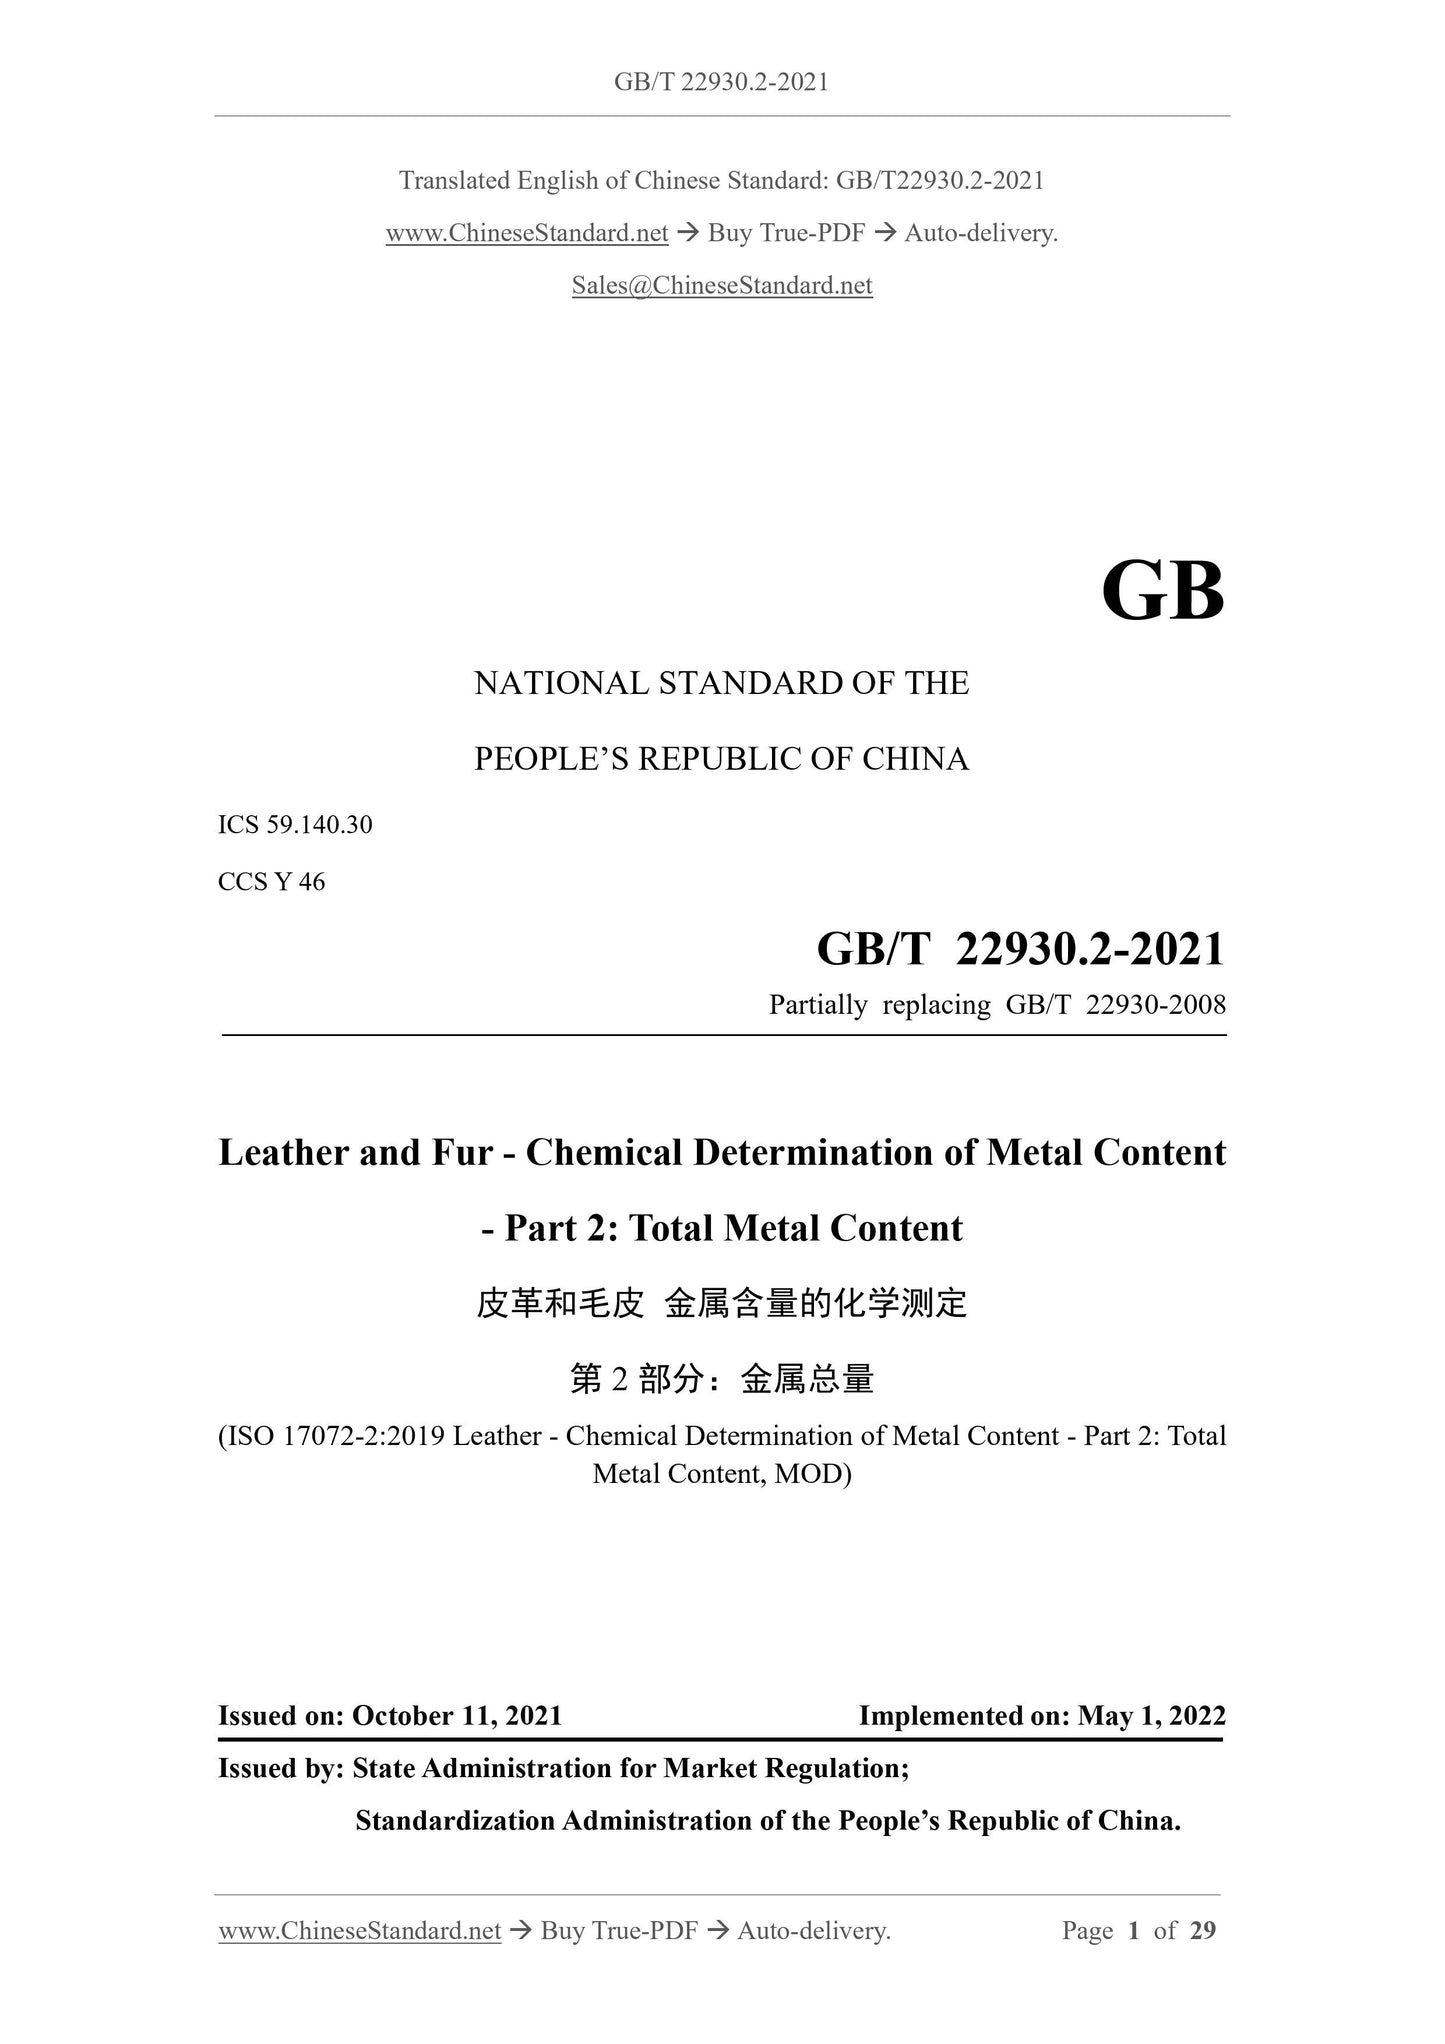 GB/T 22930.2-2021 Page 1